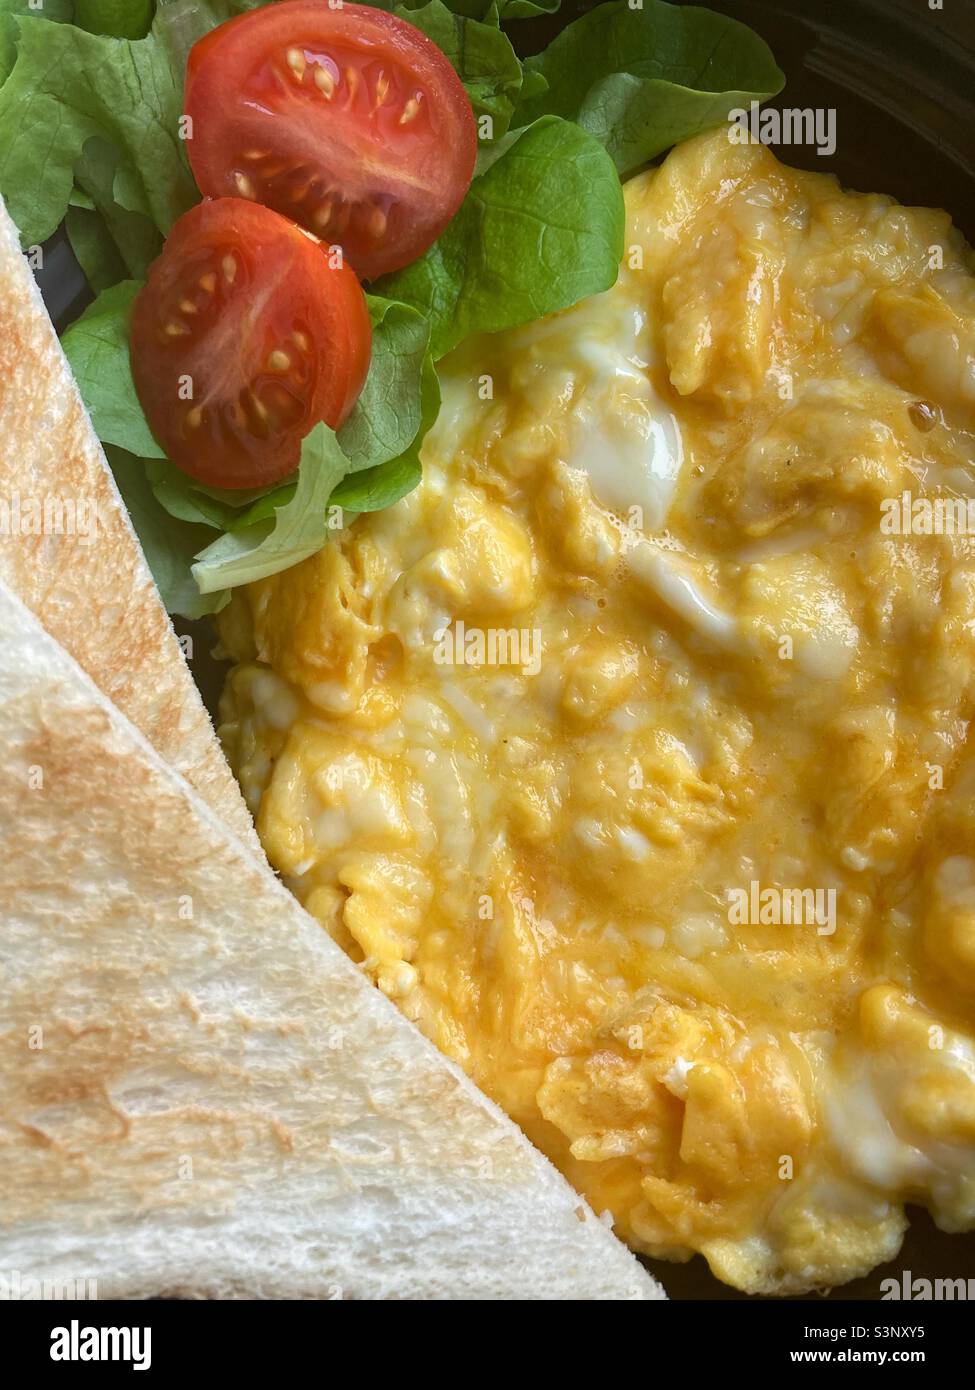 Cheese omlet with toast on the side Stock Photo